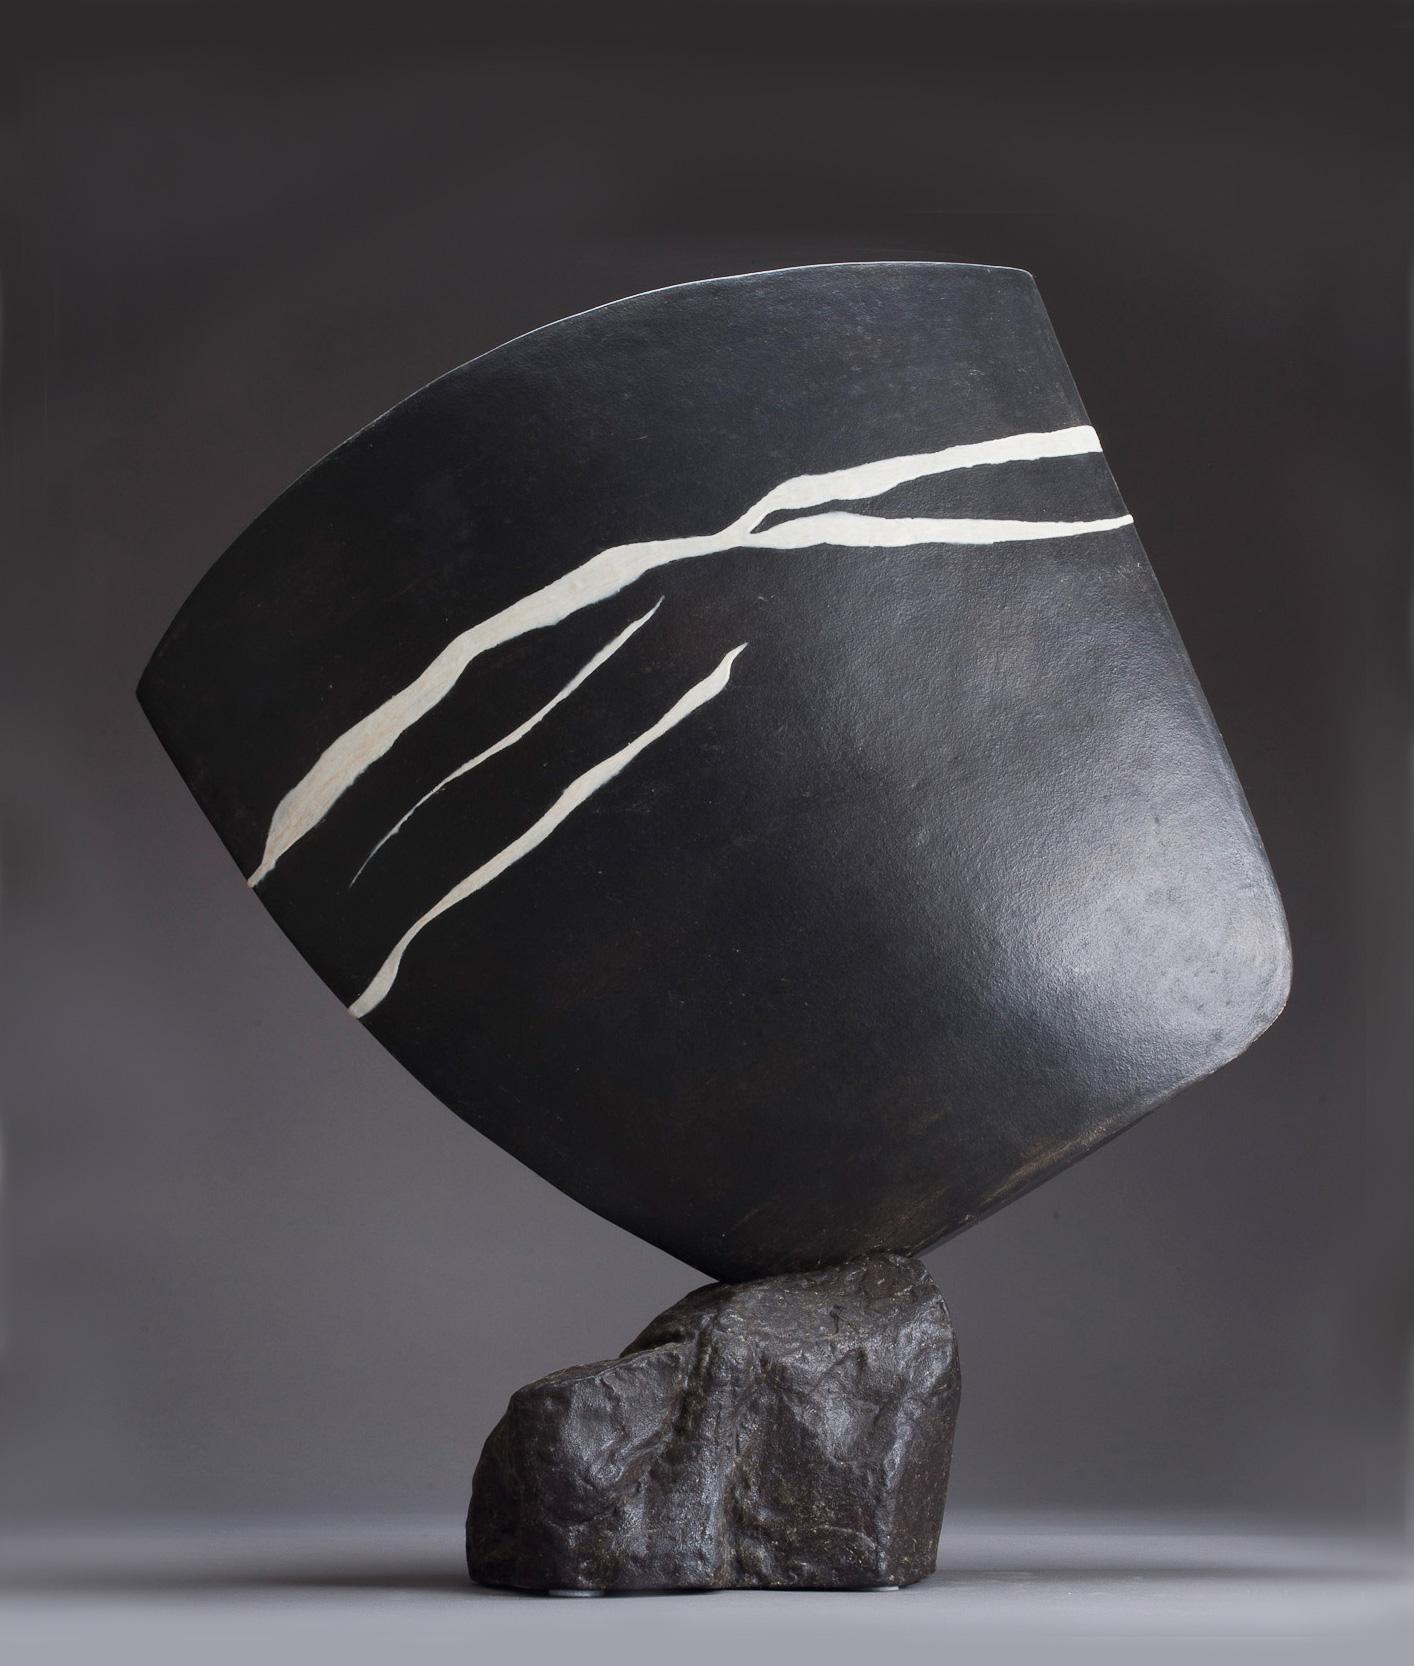 Steve Cartwright, Nefatiti

Handmade Sculptural Ceramic, Stoneware Clay, fired to 1250c

56 cm height (22.05 in)

Edition of 5 per year